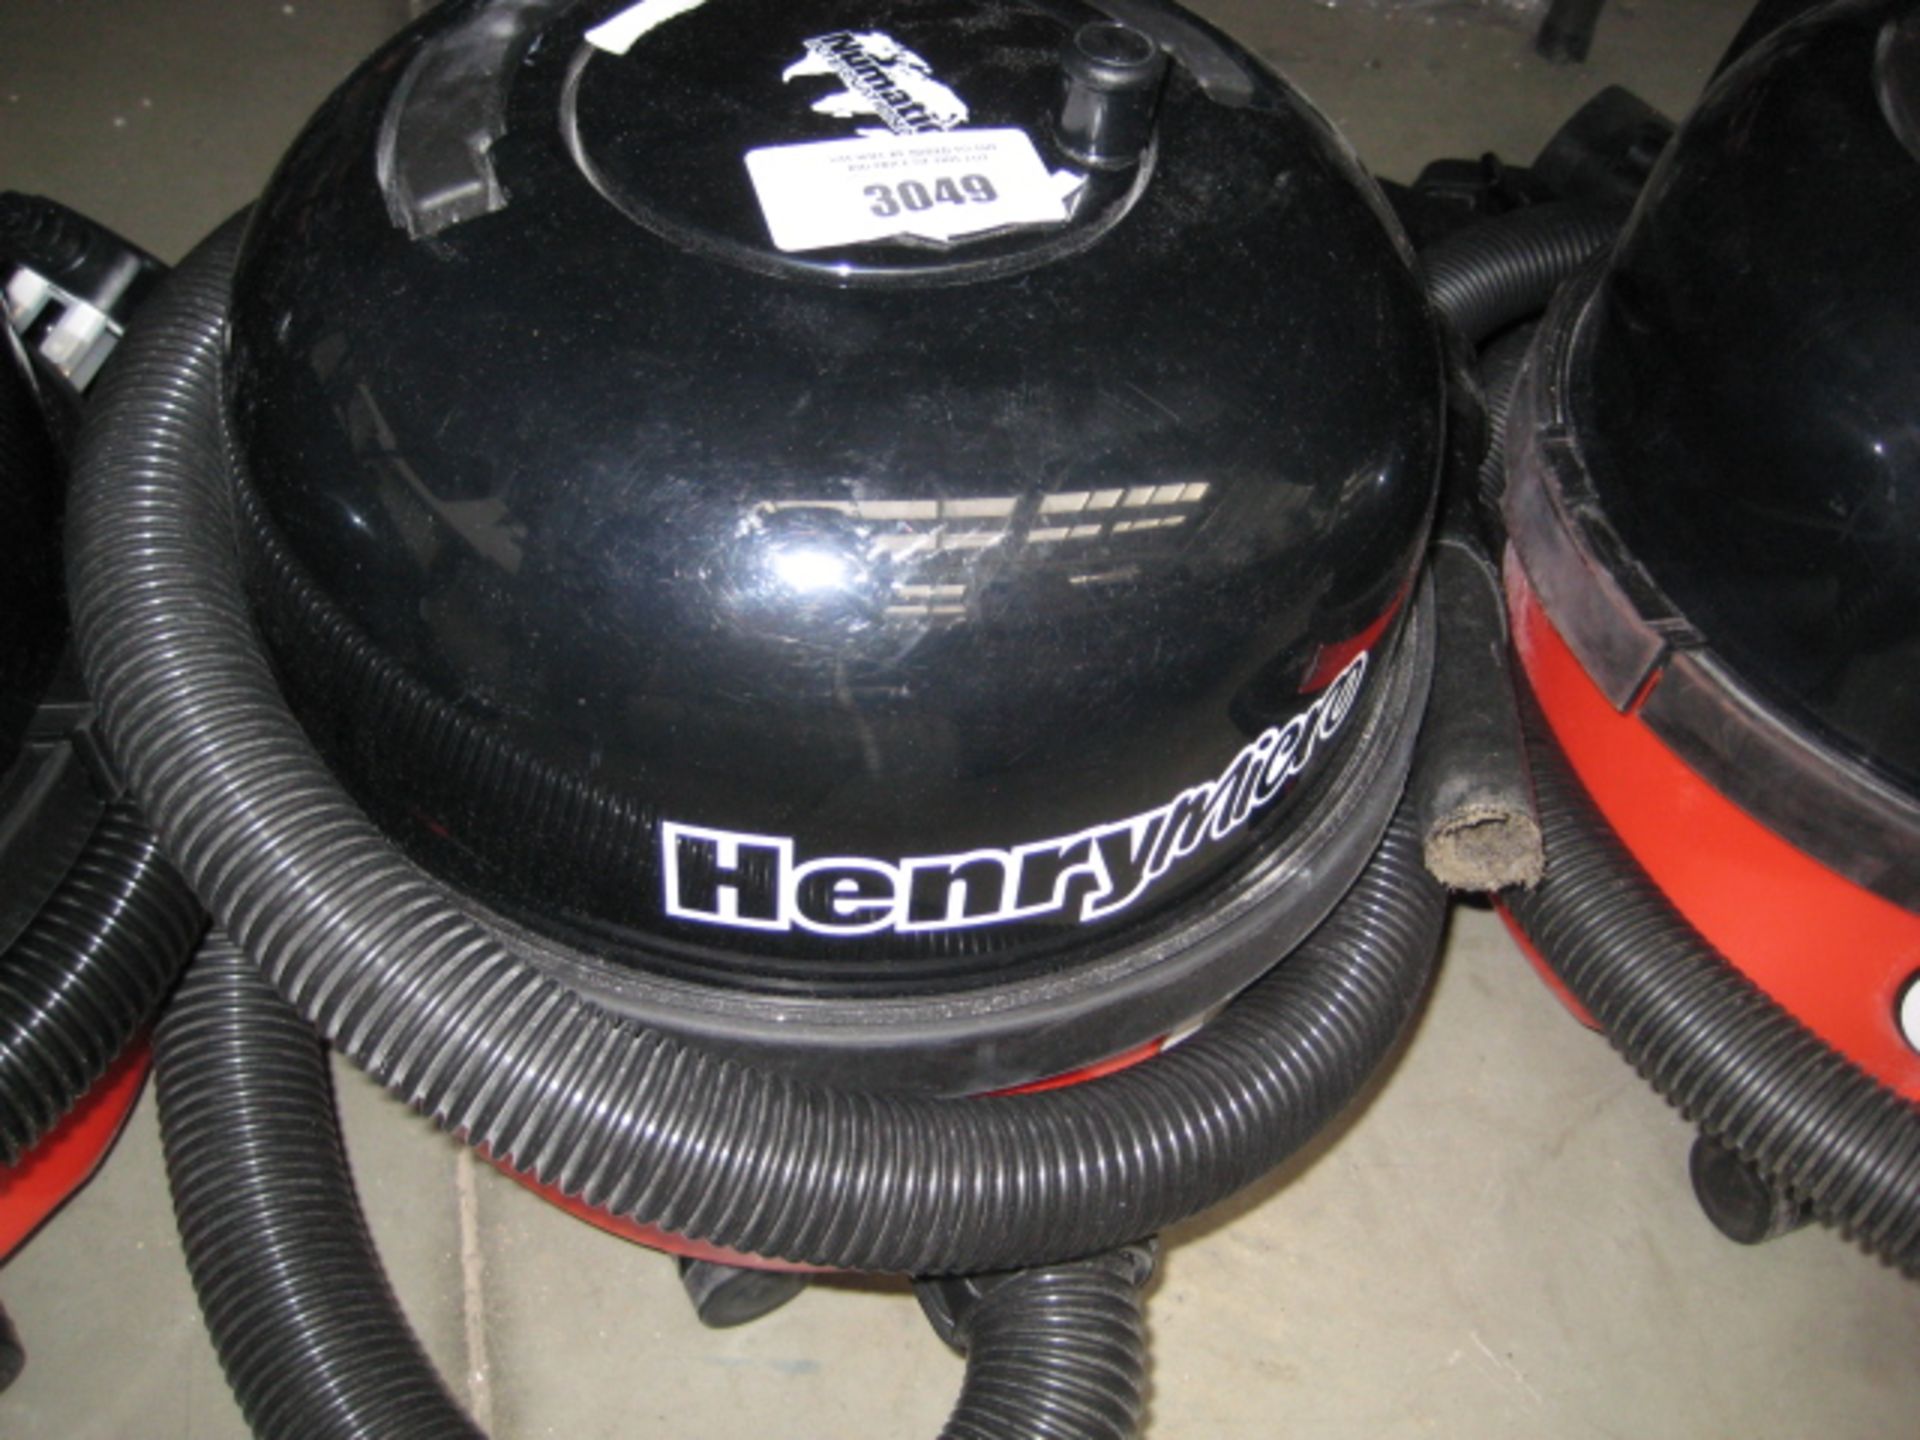 Henry micro vacuum cleaner (no pole)